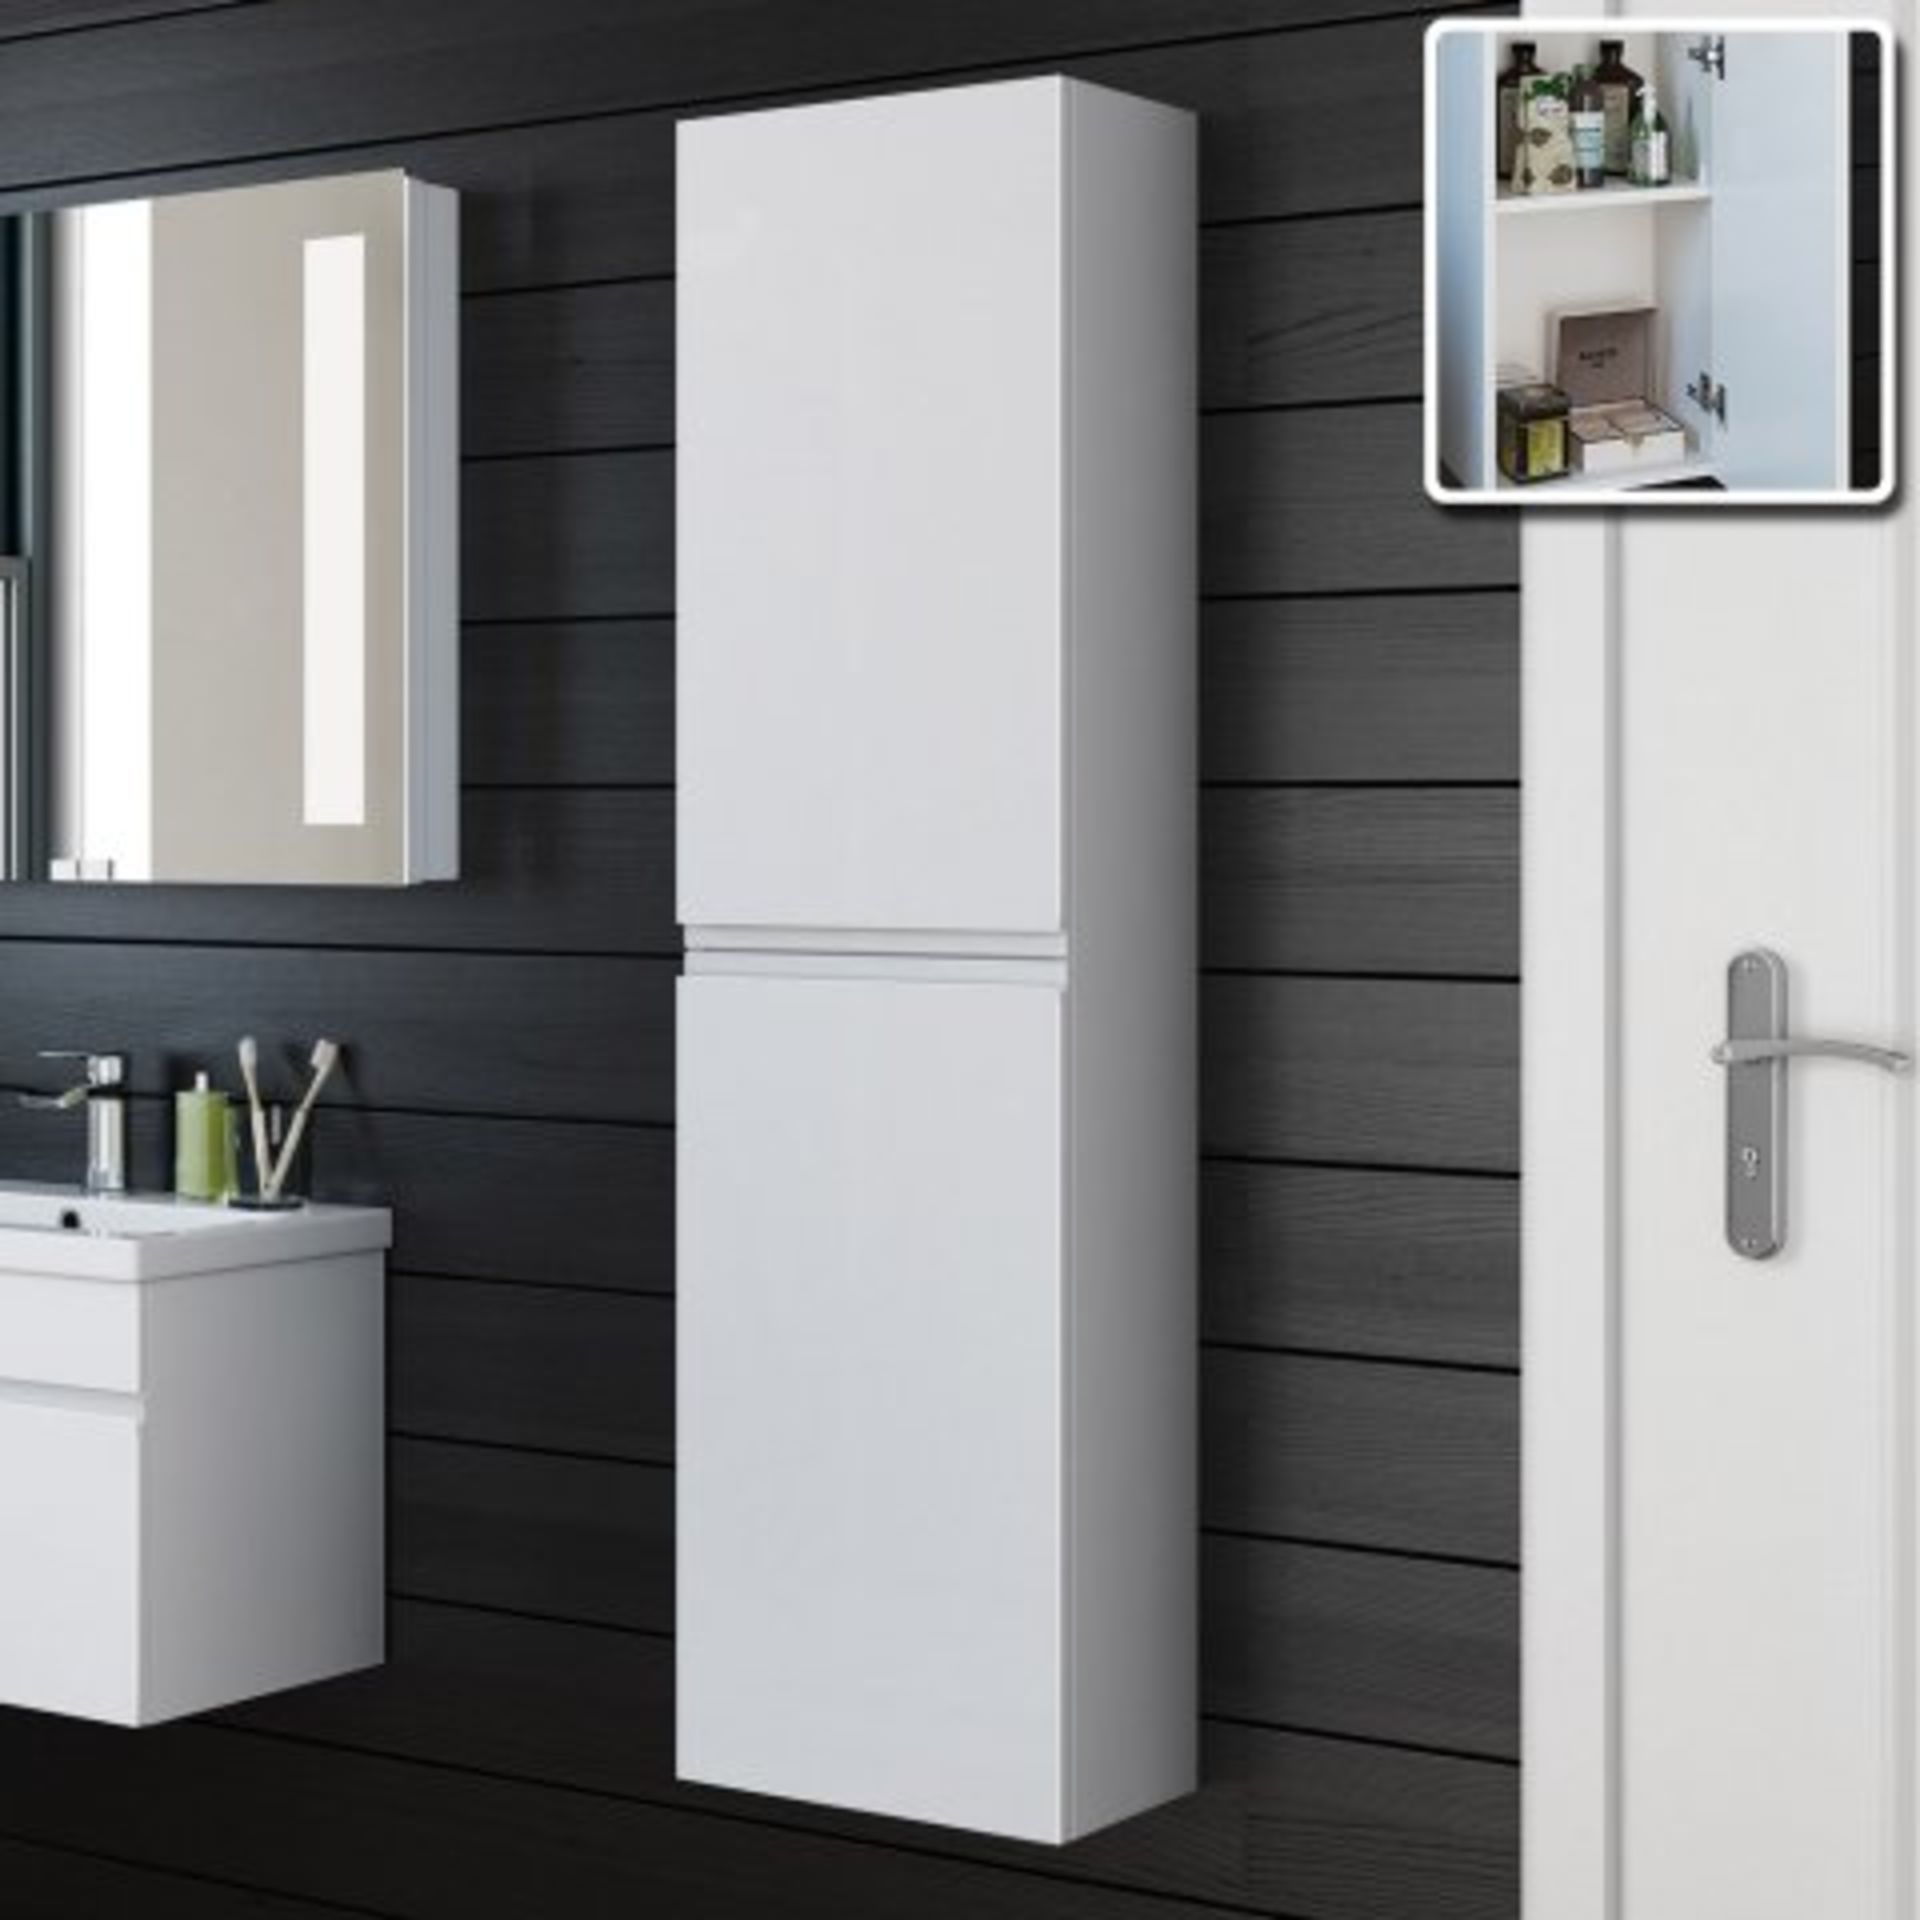 (H222) 1400mm Trent Gloss White Tall Storage Cabinet - Wall Hung. RRP £259.99. Our Trent Gloss White